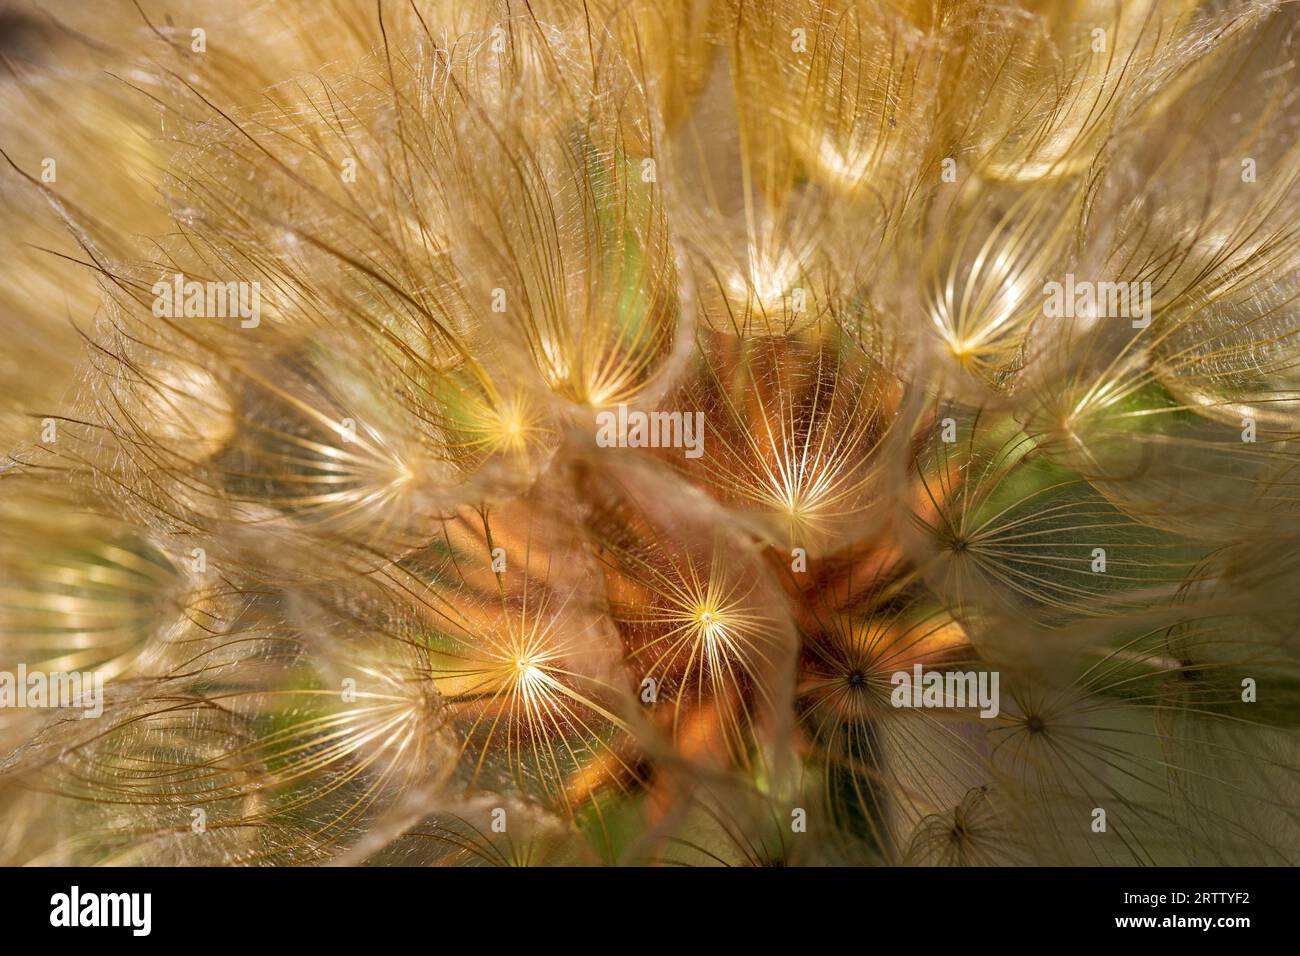 Close up of Tragopogon pratensis , common names Jack-go-to-bed-at-noon meadow salsify, showy goat's-beard or meadow goat's-beard in the summer garden Stock Photo